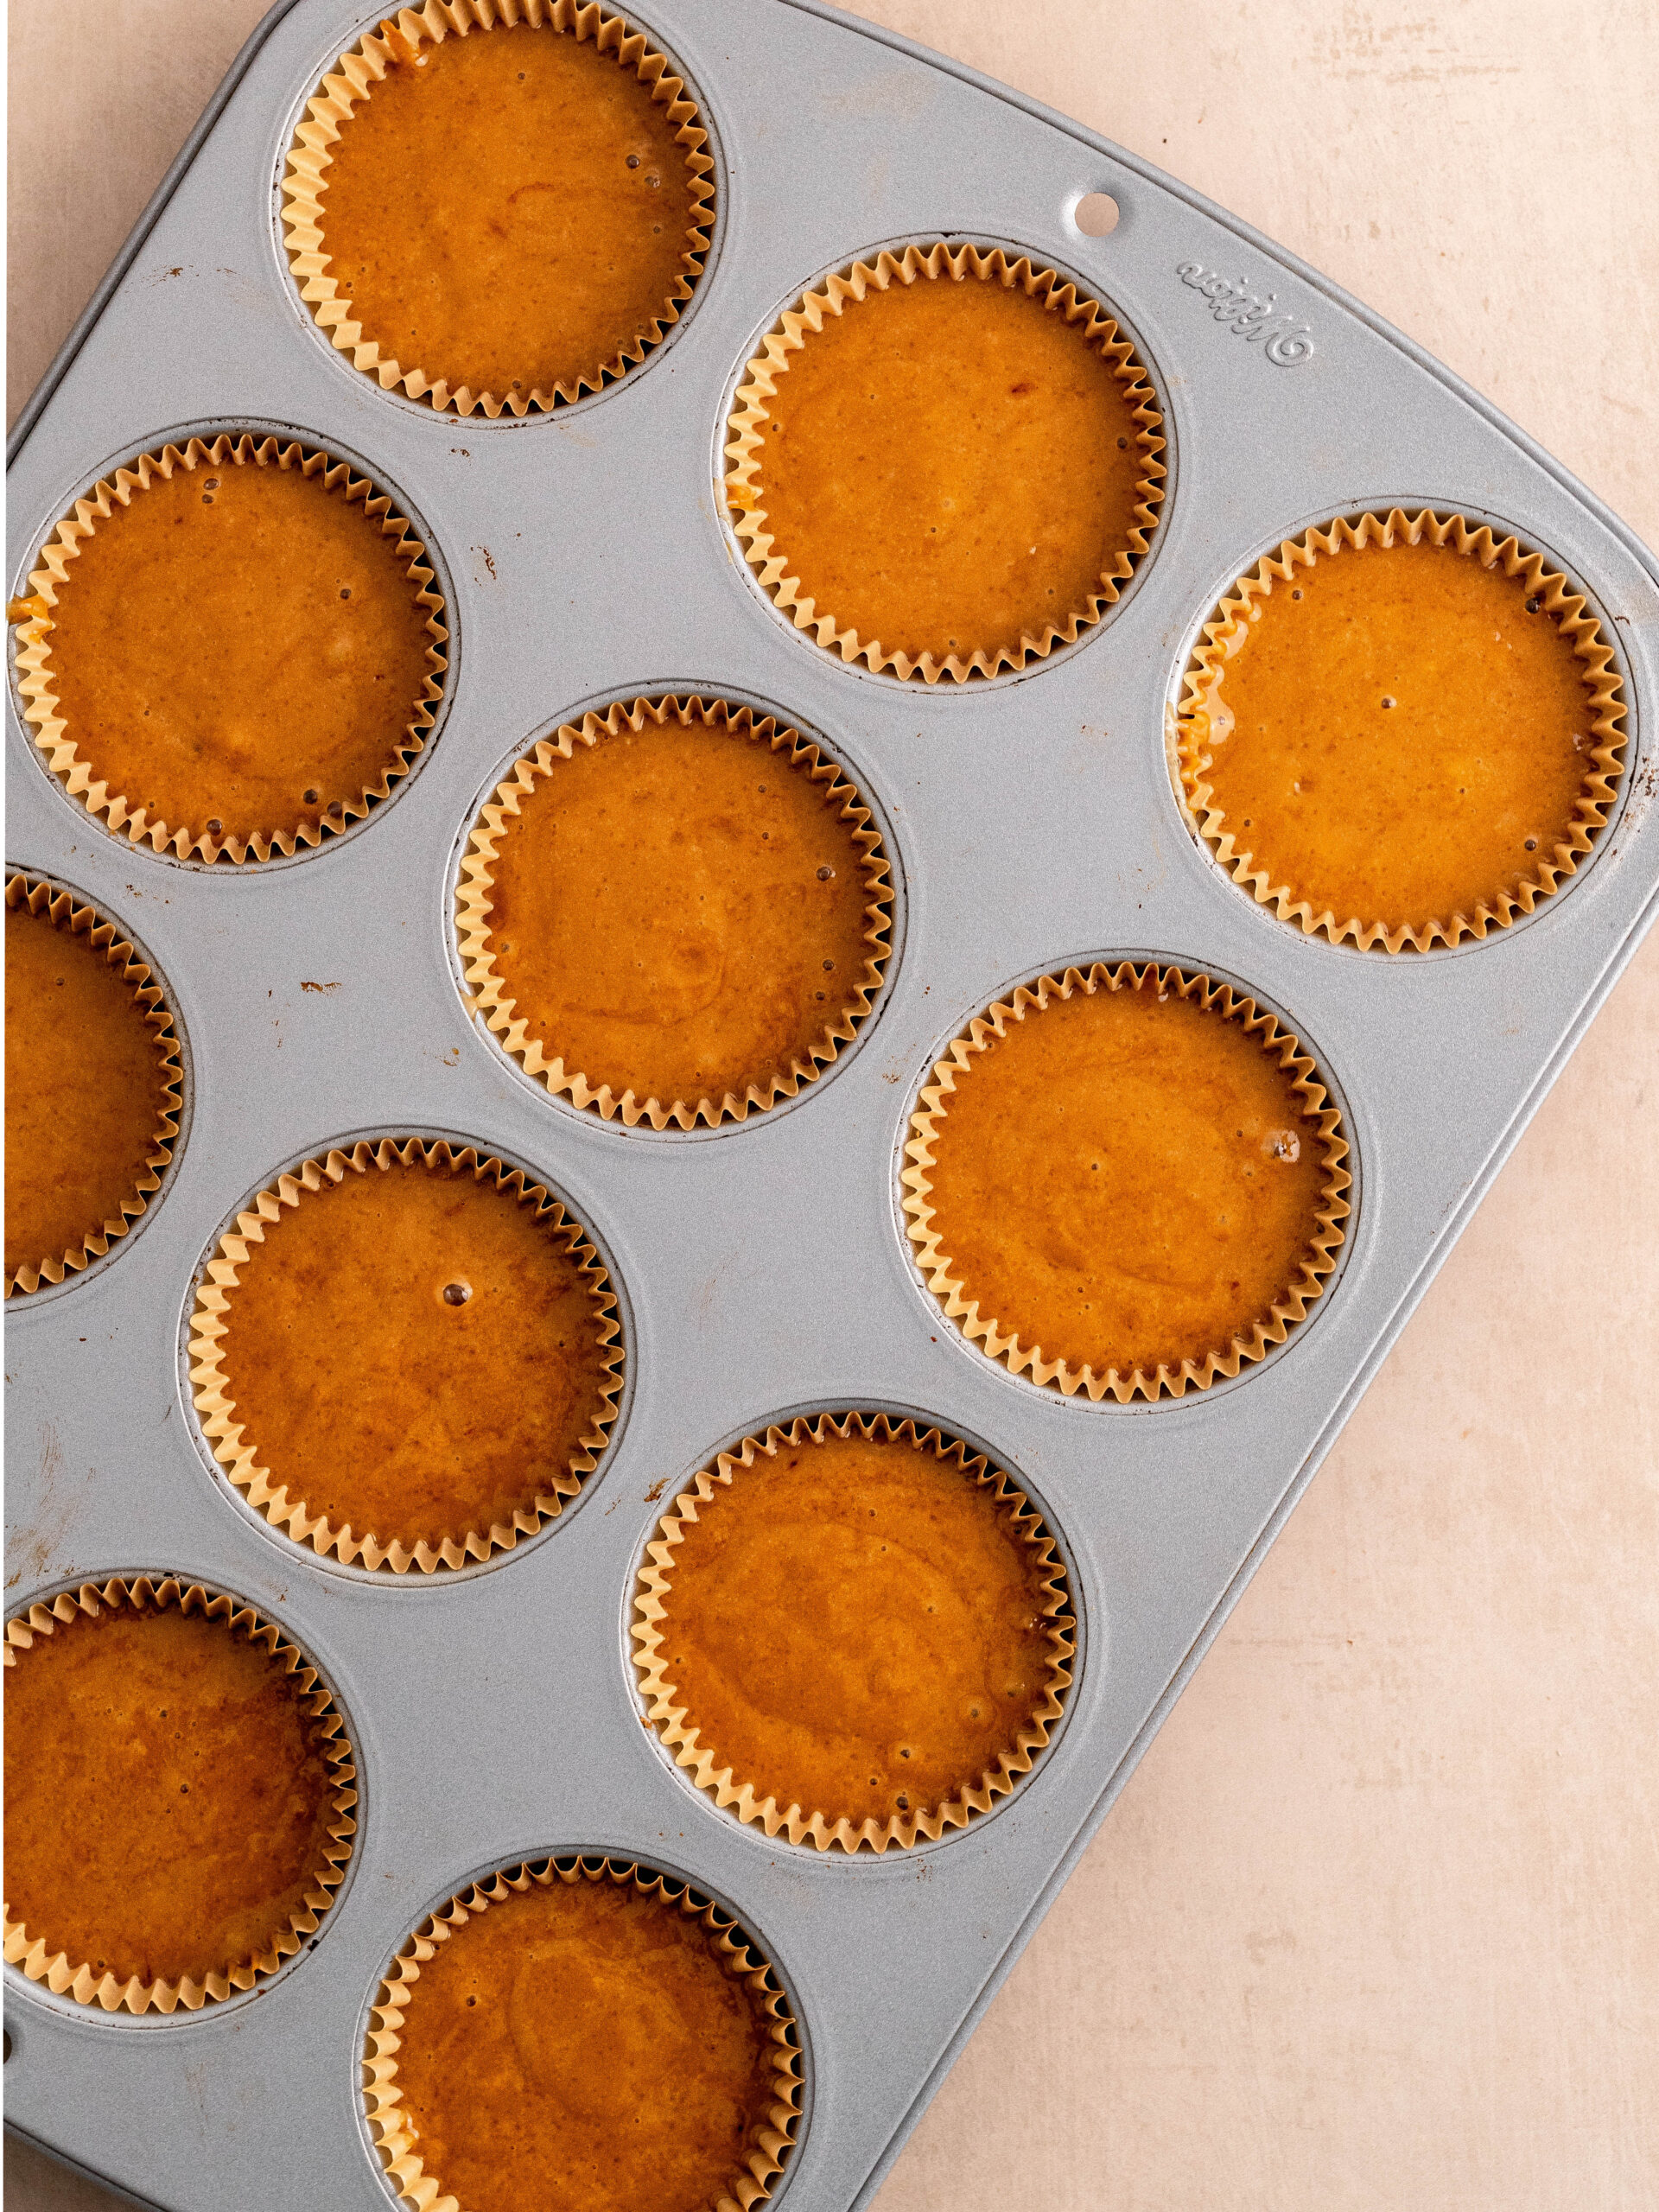 Step 4. Divide the batter into a 12 cup cupcake pan.